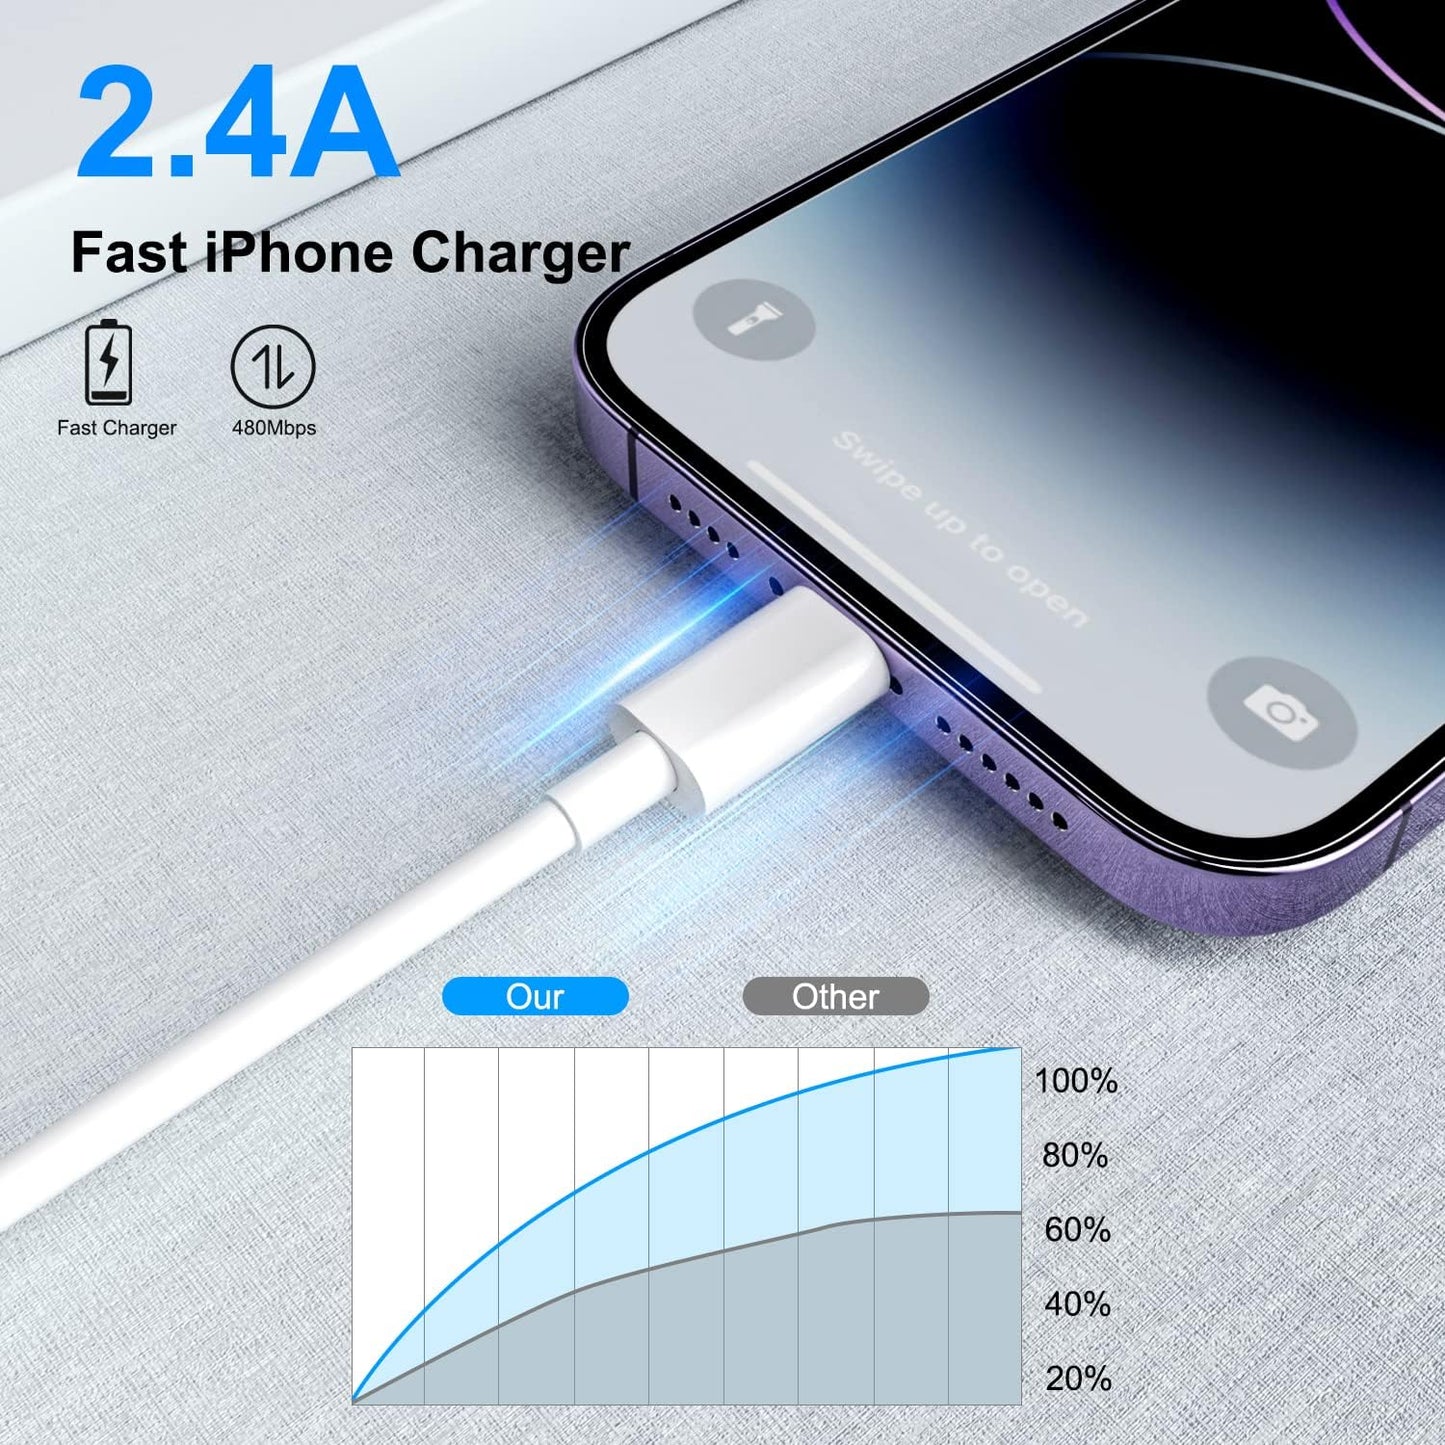 4-Pack[Apple MFi Certified] iPhone Charger Cord 6ft Long,USB to Lightning Cable,Apple USB 2.4A Fast Charging Cord for iPhone 14/13/12/11 Pro/11/XS MAX/XR/8/7/6s Plus,iPad Pro/Air/Mini,iPod Touch